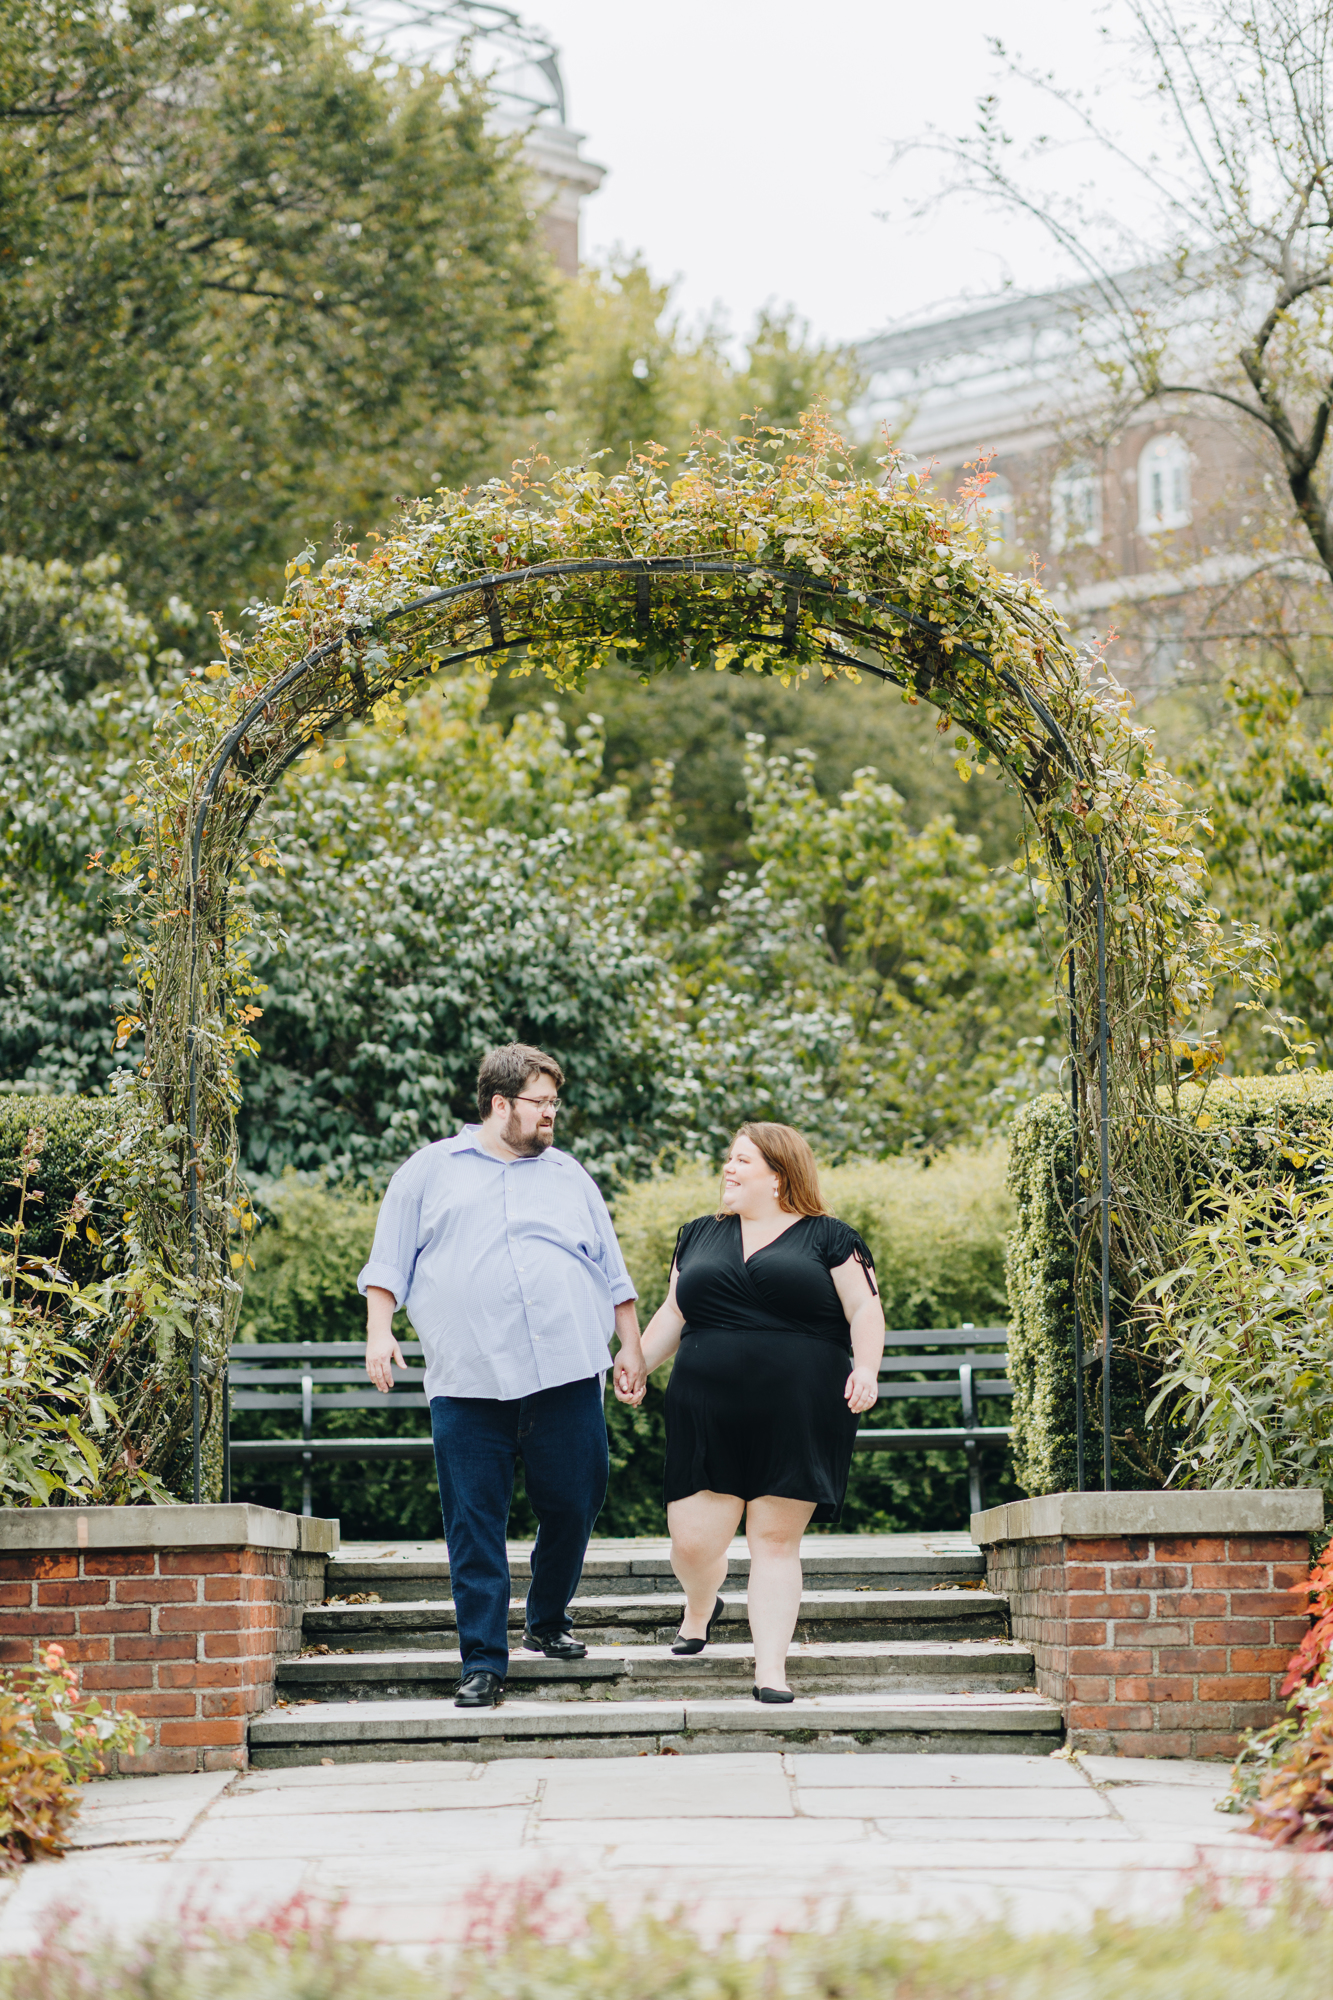 Timeless Engagement Photos in NYC